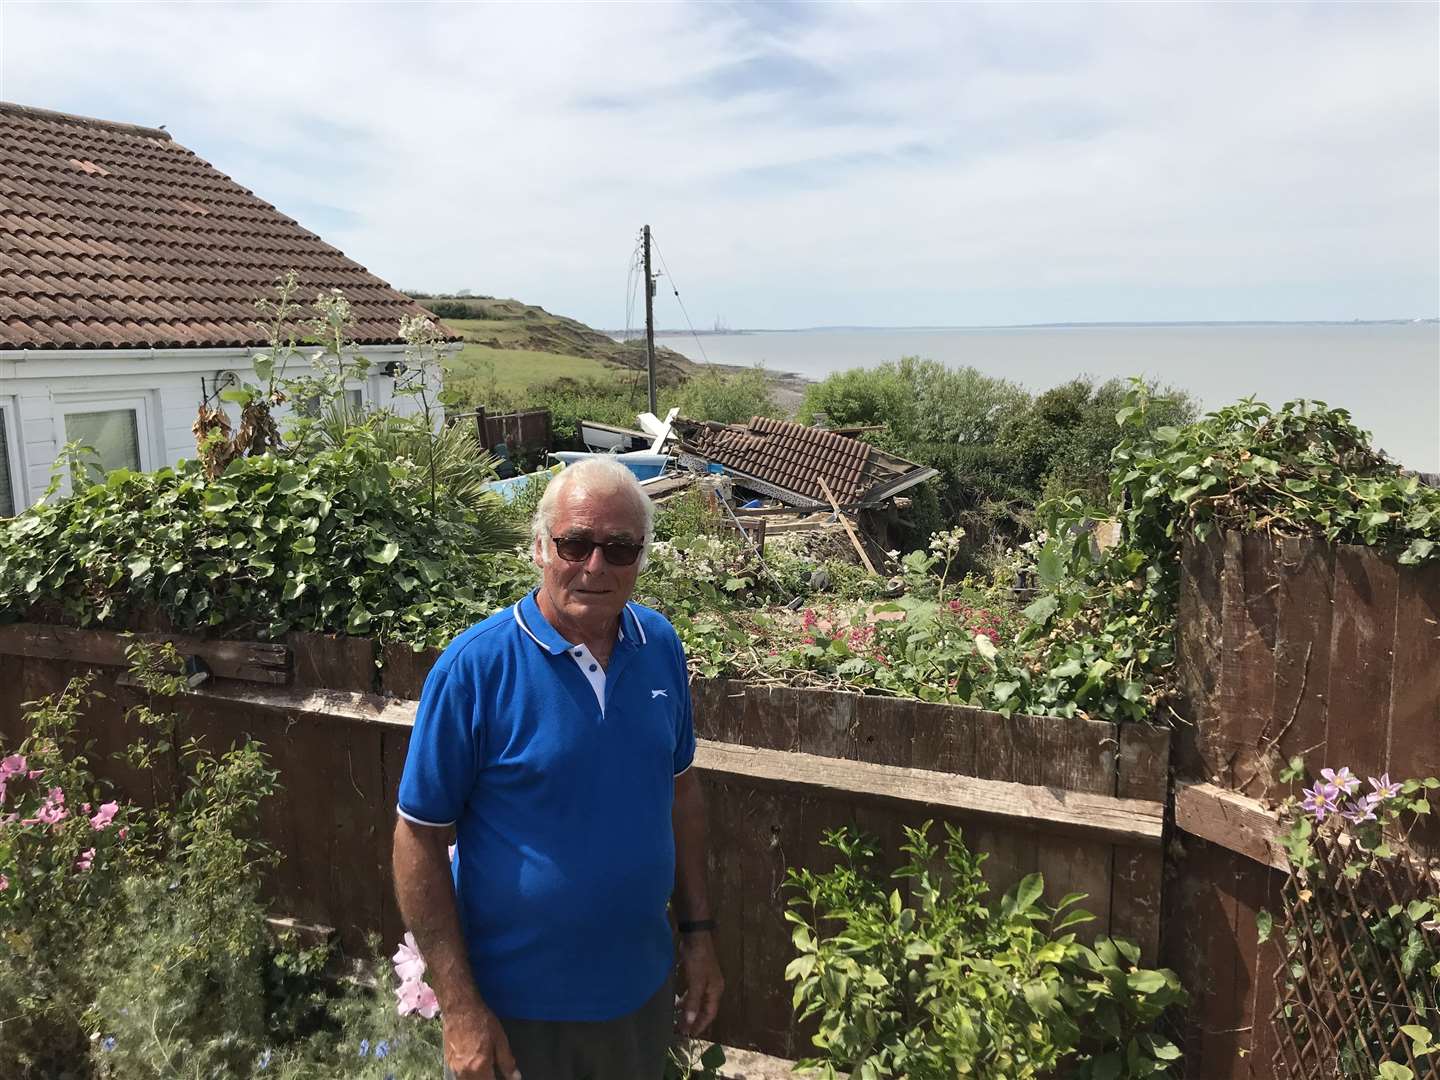 Ed pictured in his garden in June 2020 just after the first cliff fall claimed a home